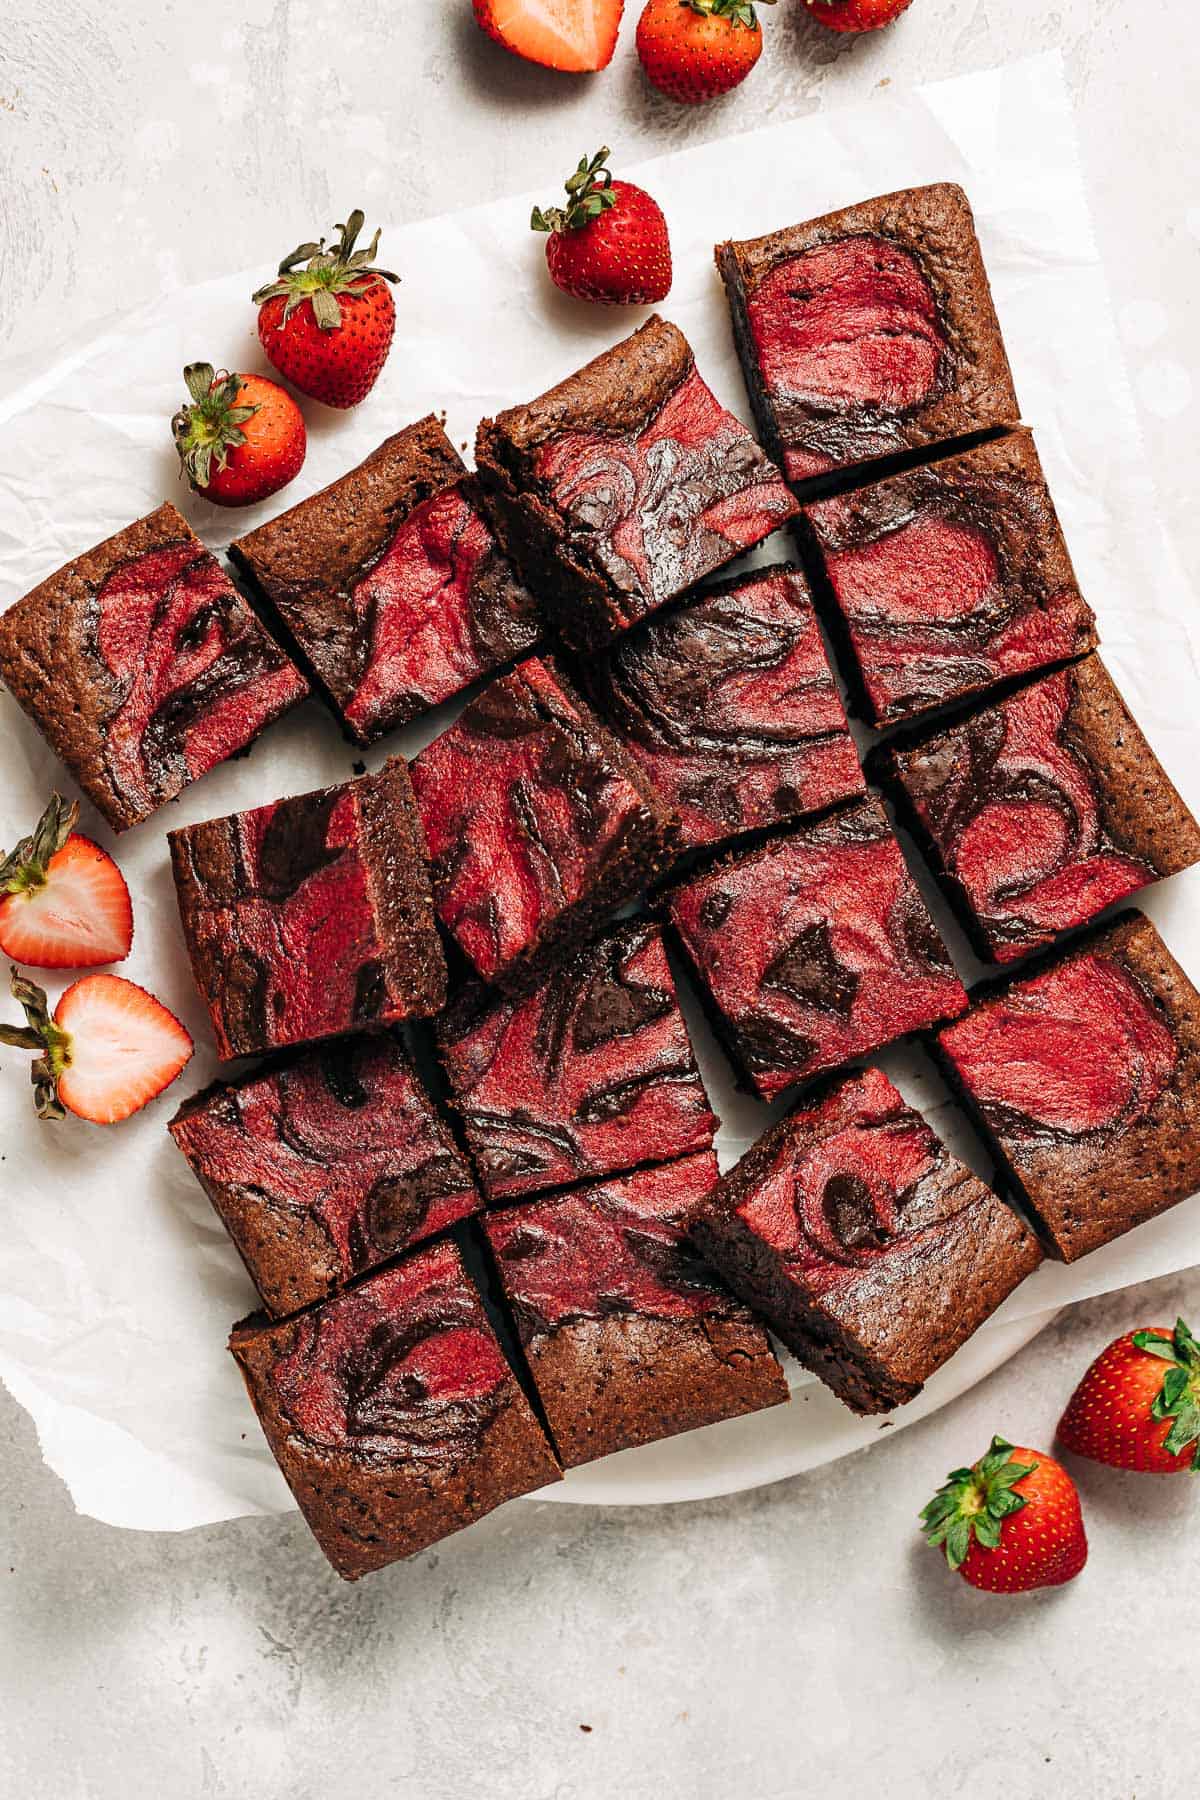 strawberry swirl brownies on parchment paper with fresh starwberries.